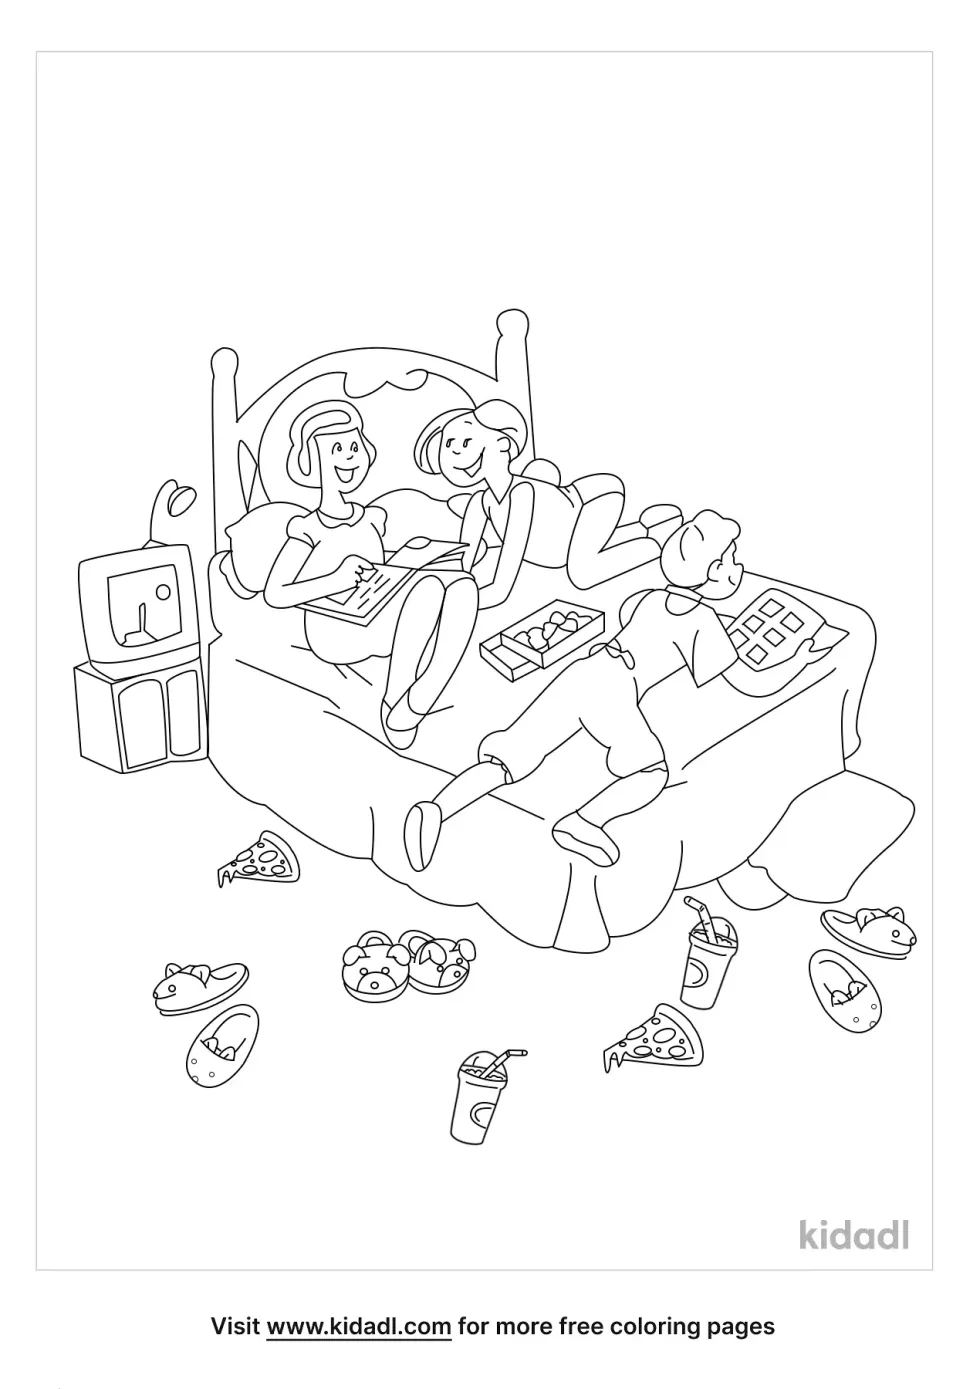 A coloring picture of three girls on a bed having a sleepover